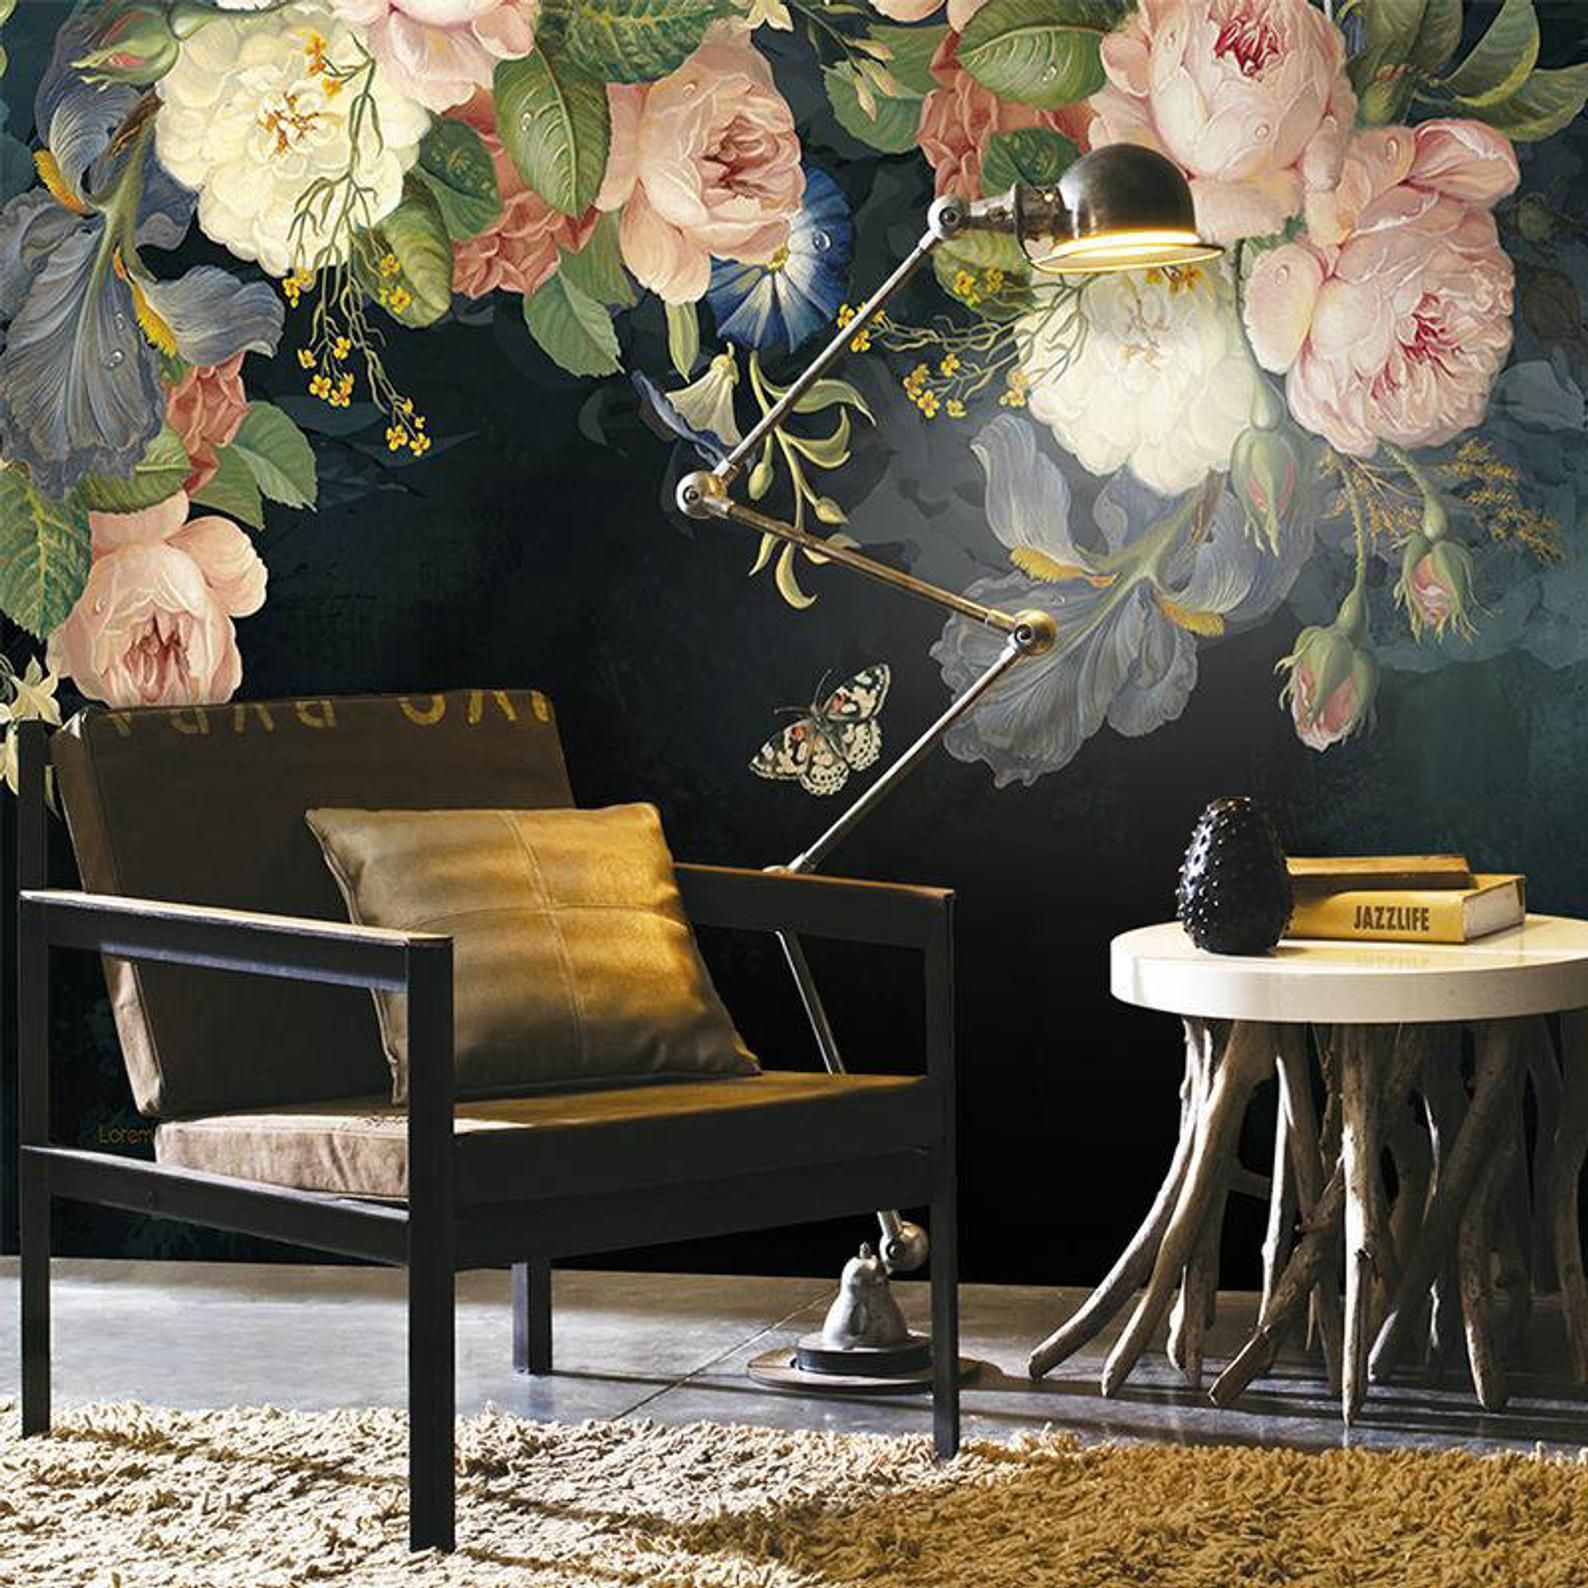 The floral wallpaper (bloemen behang) is the most preferred by the clients of the company Vlies Behang post thumbnail image